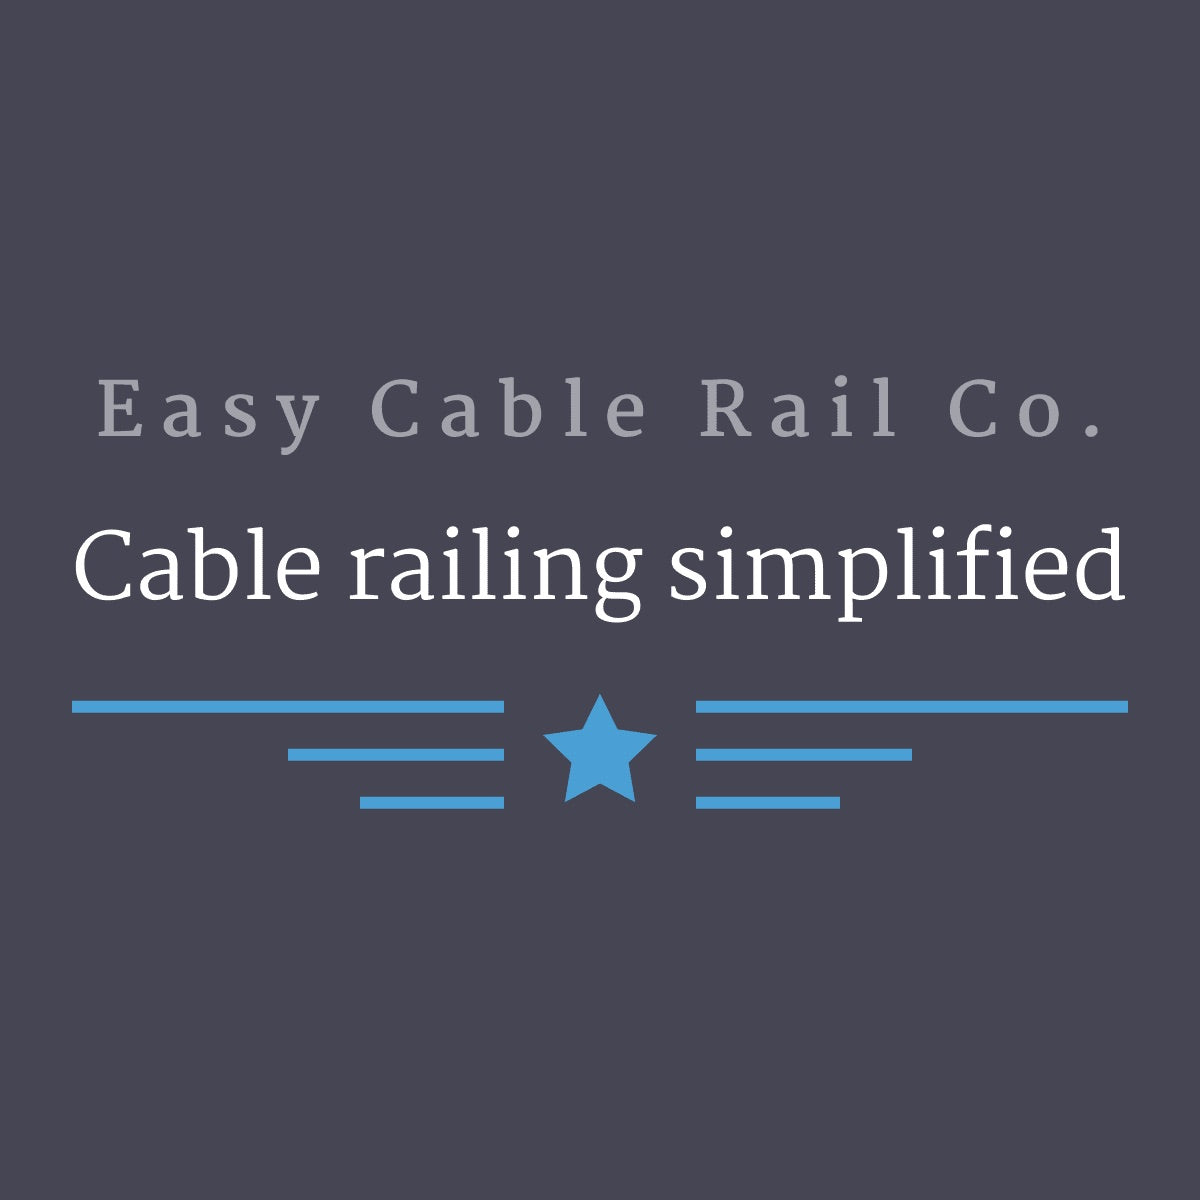 Easy Cable Rail Co.